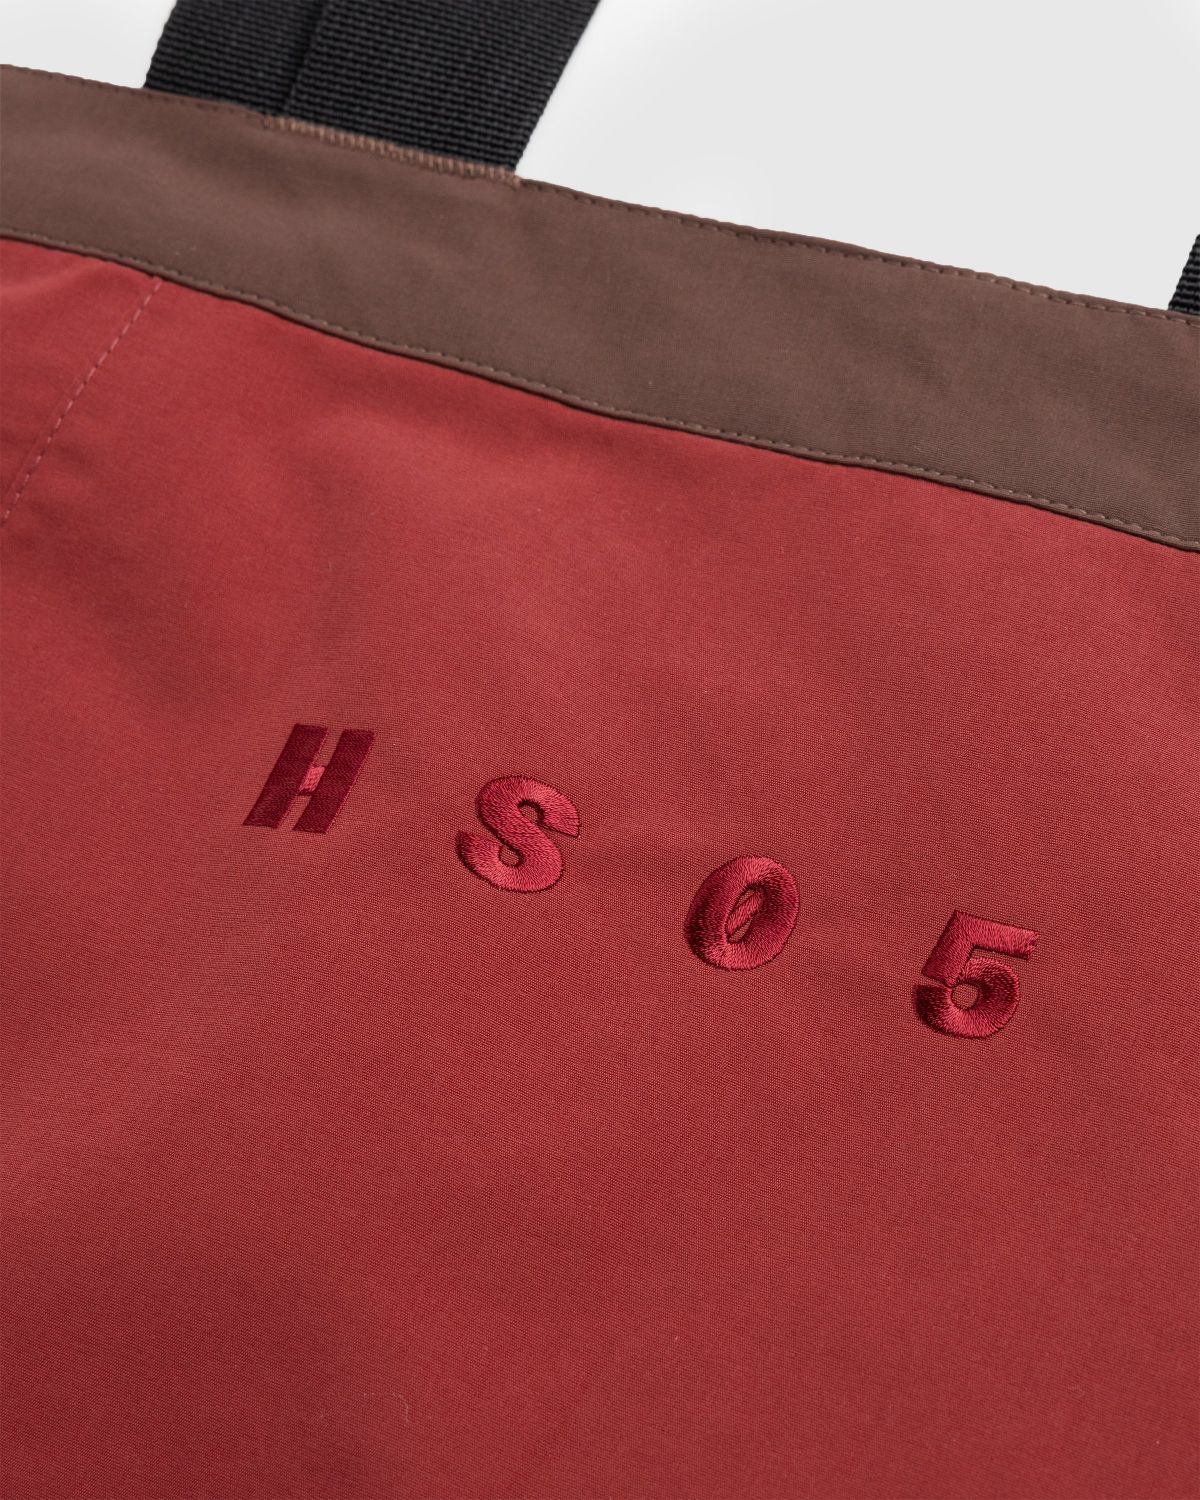 Highsnobiety HS05 – 3-Layer Nylon Tote Bag Red - Bags - Red - Image 5